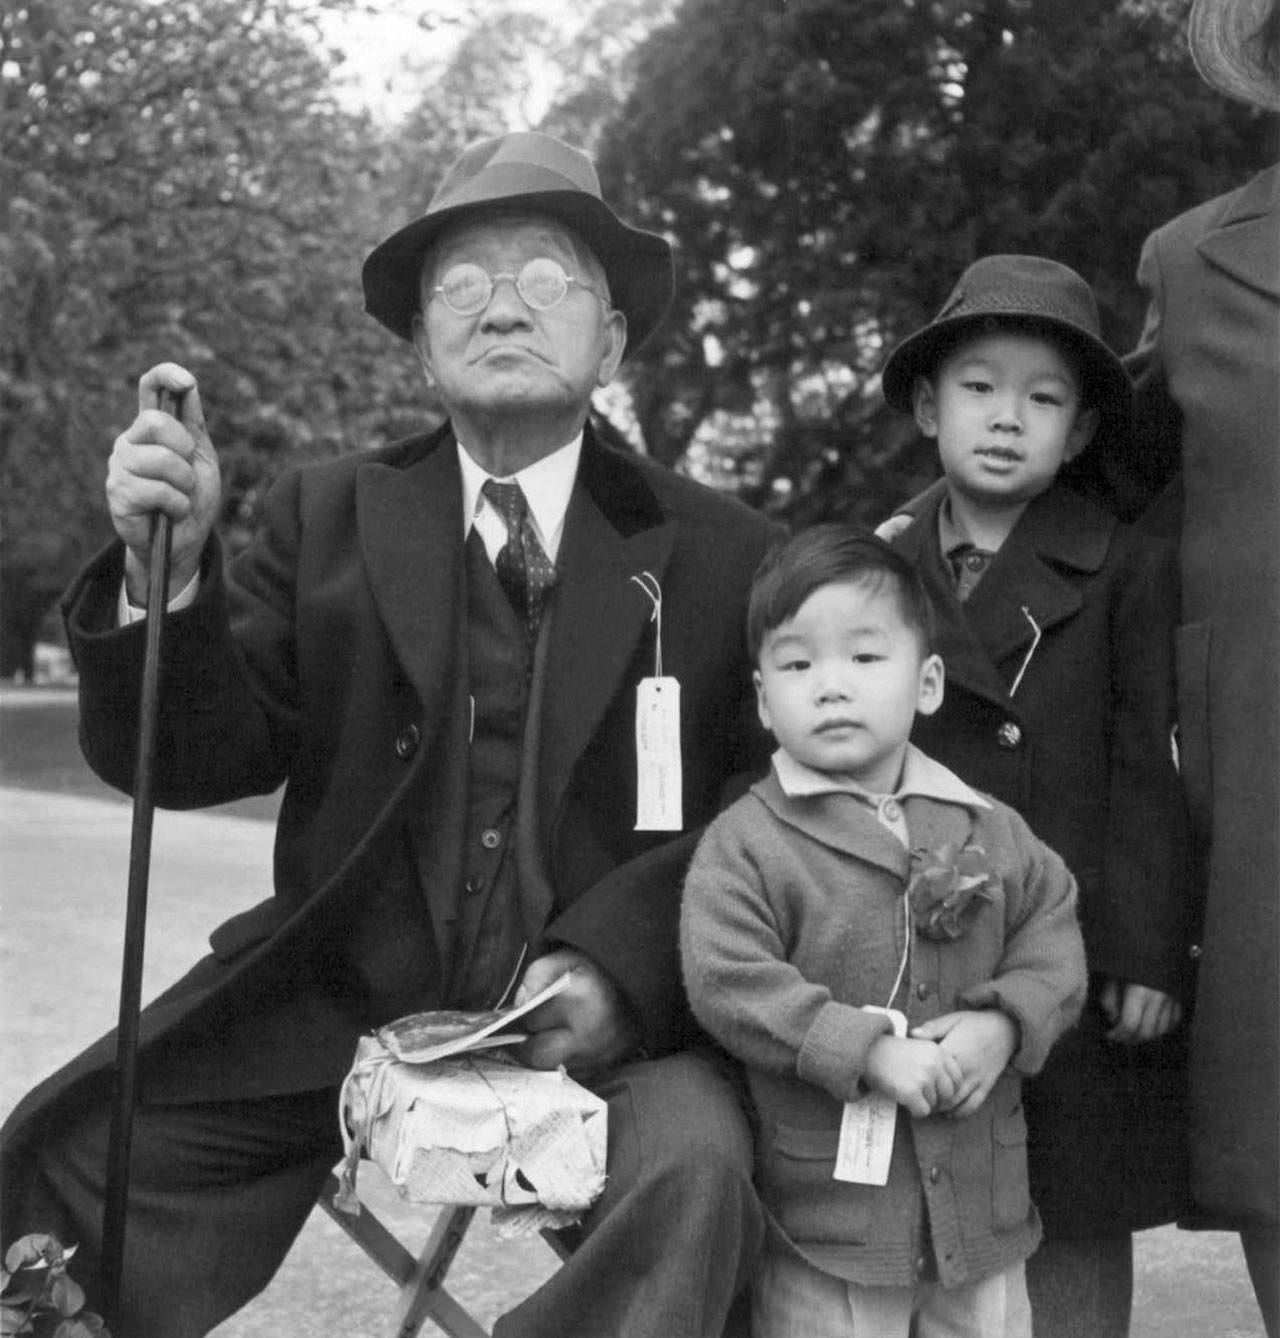 A grandfather and his grandchildren await an evacuation bus in 1942, in Hayward, California, during the Japanese evacuation and internment (Dorothea Lange Photo).